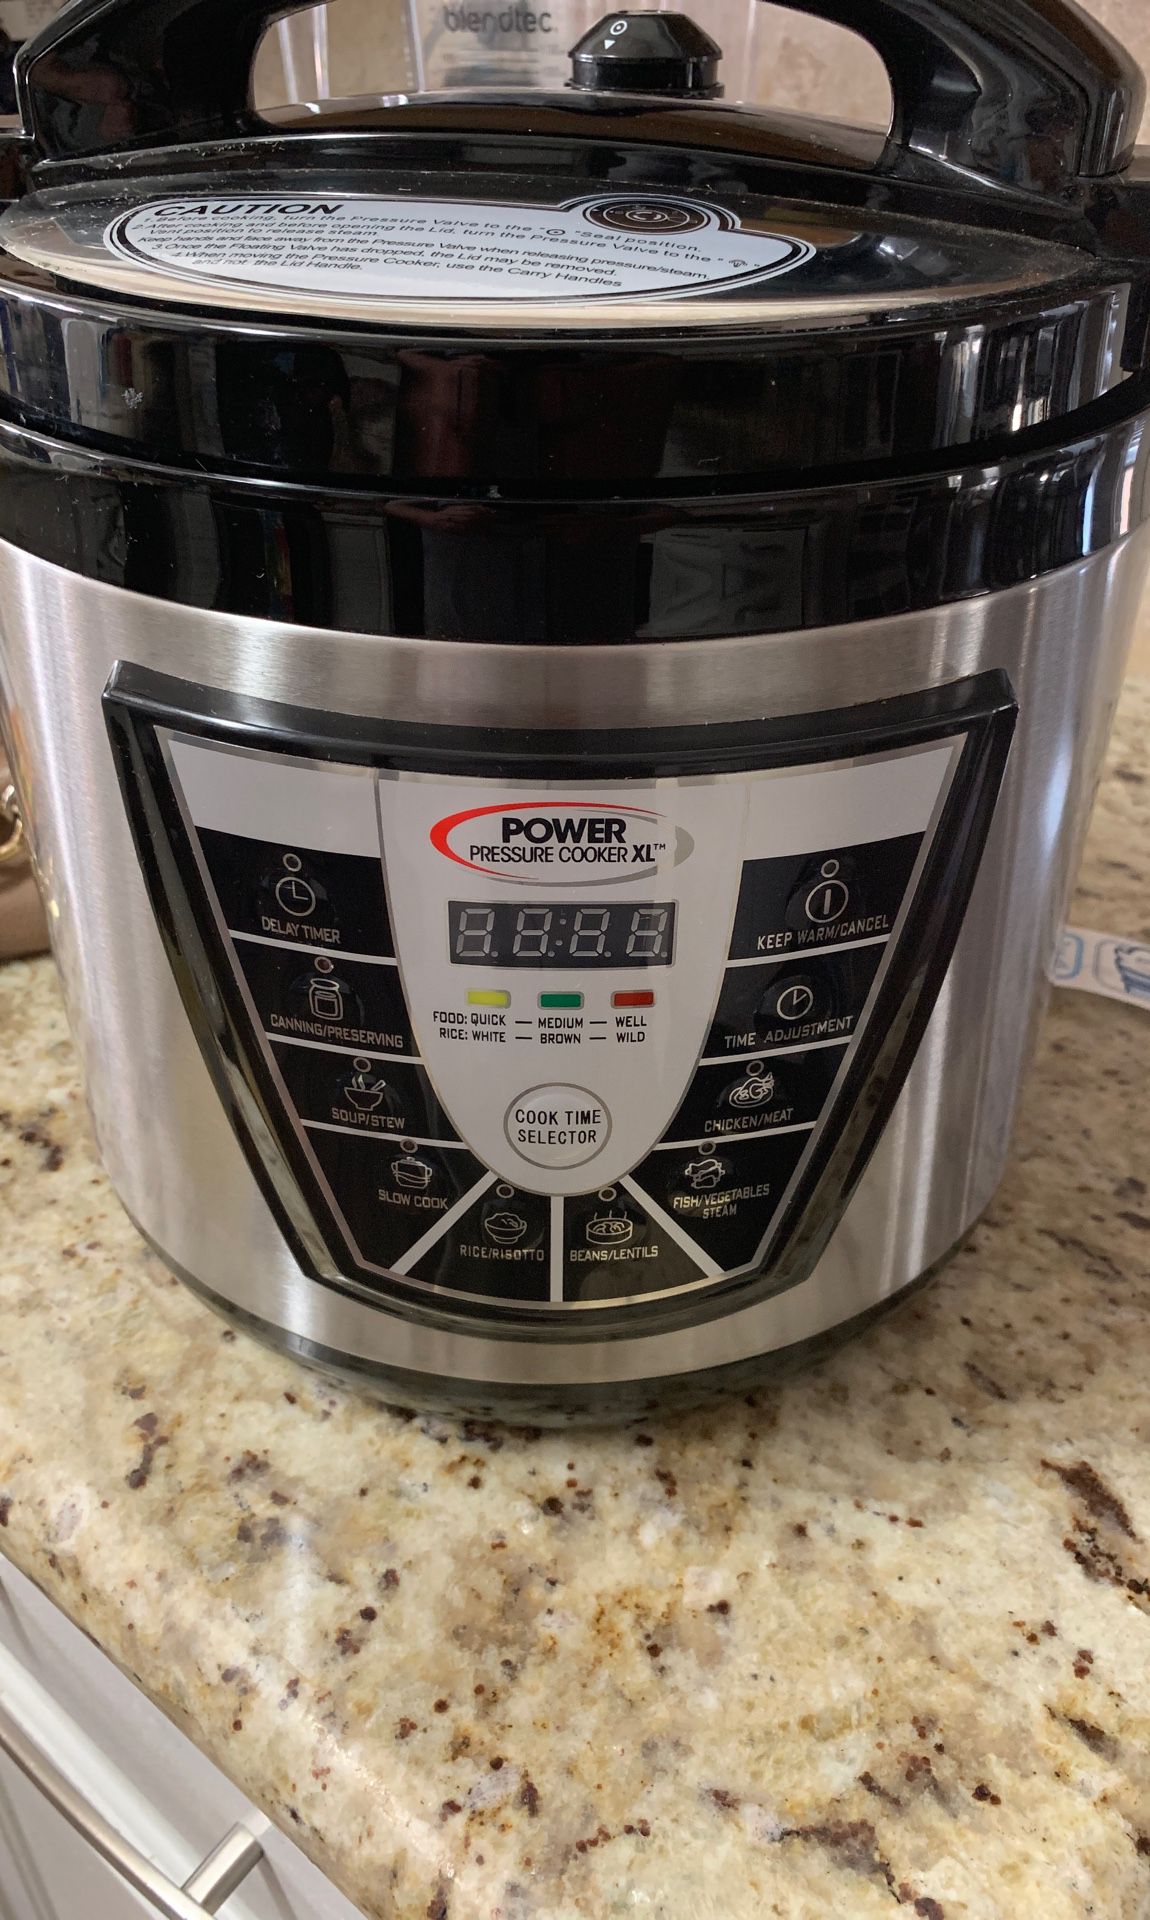 Power Pressure Cooker XL - Instant Pots bigger and better competition